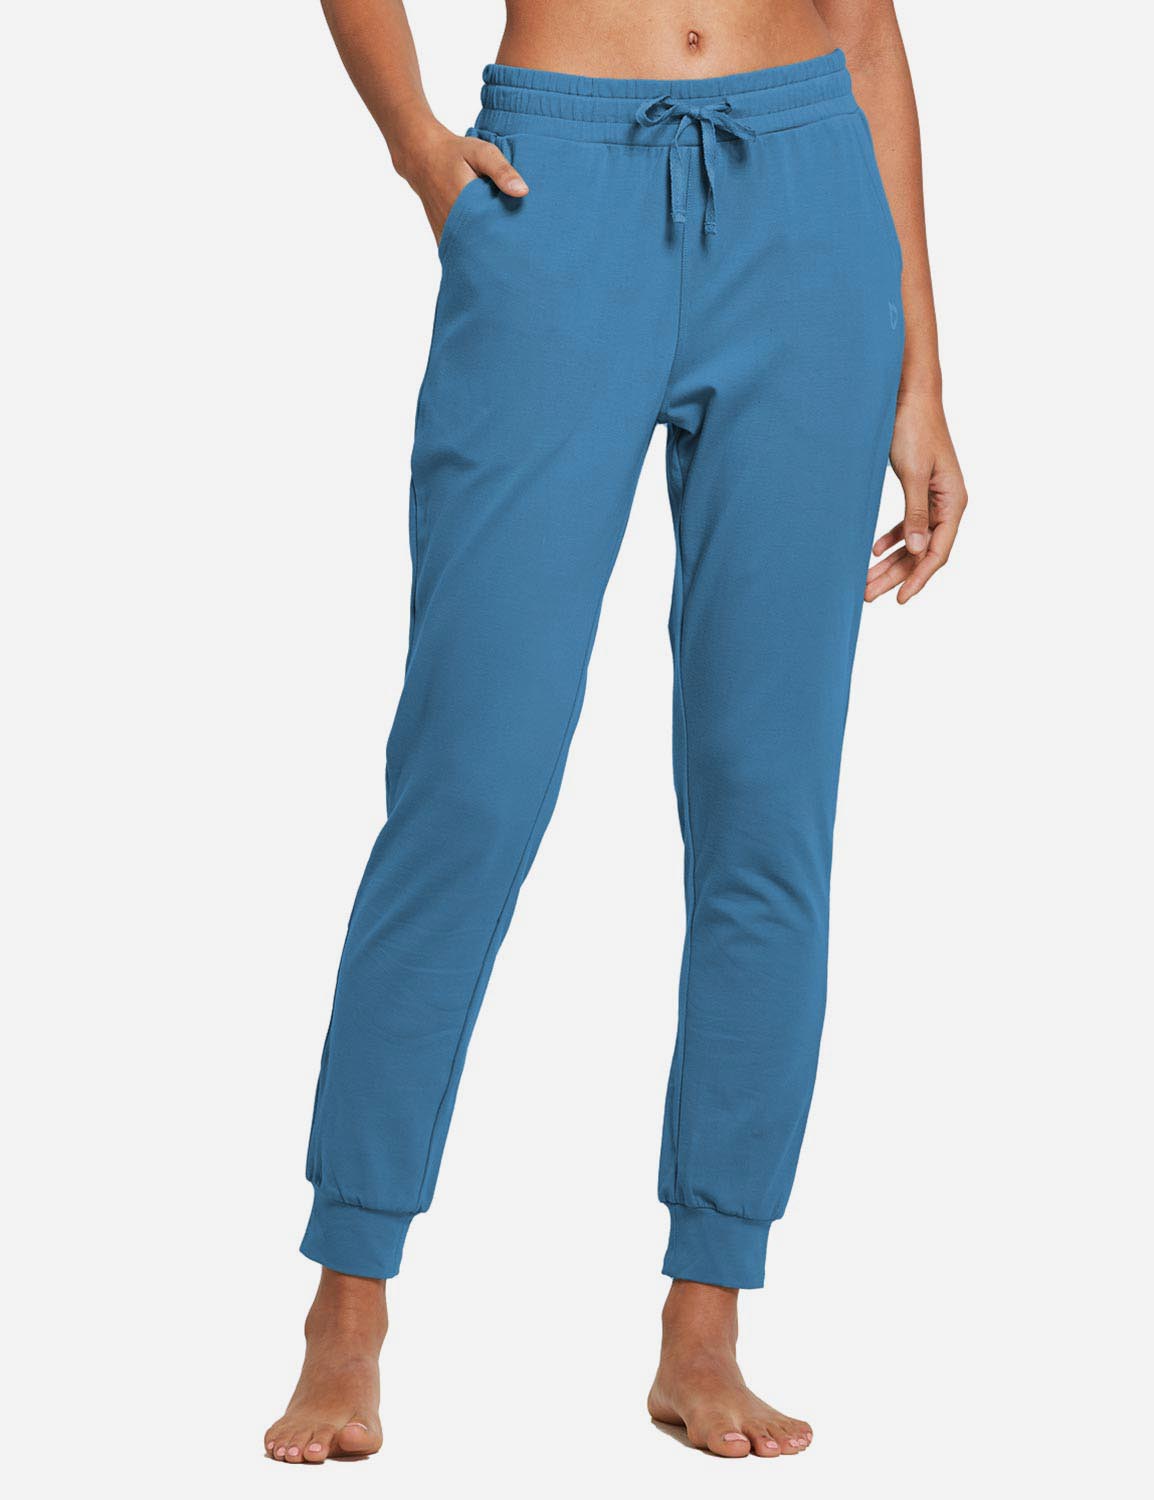 Baleaf Women's Cotton Comfy Pocketed & Tapered Weekend Joggers abh103 Sea Blue Front